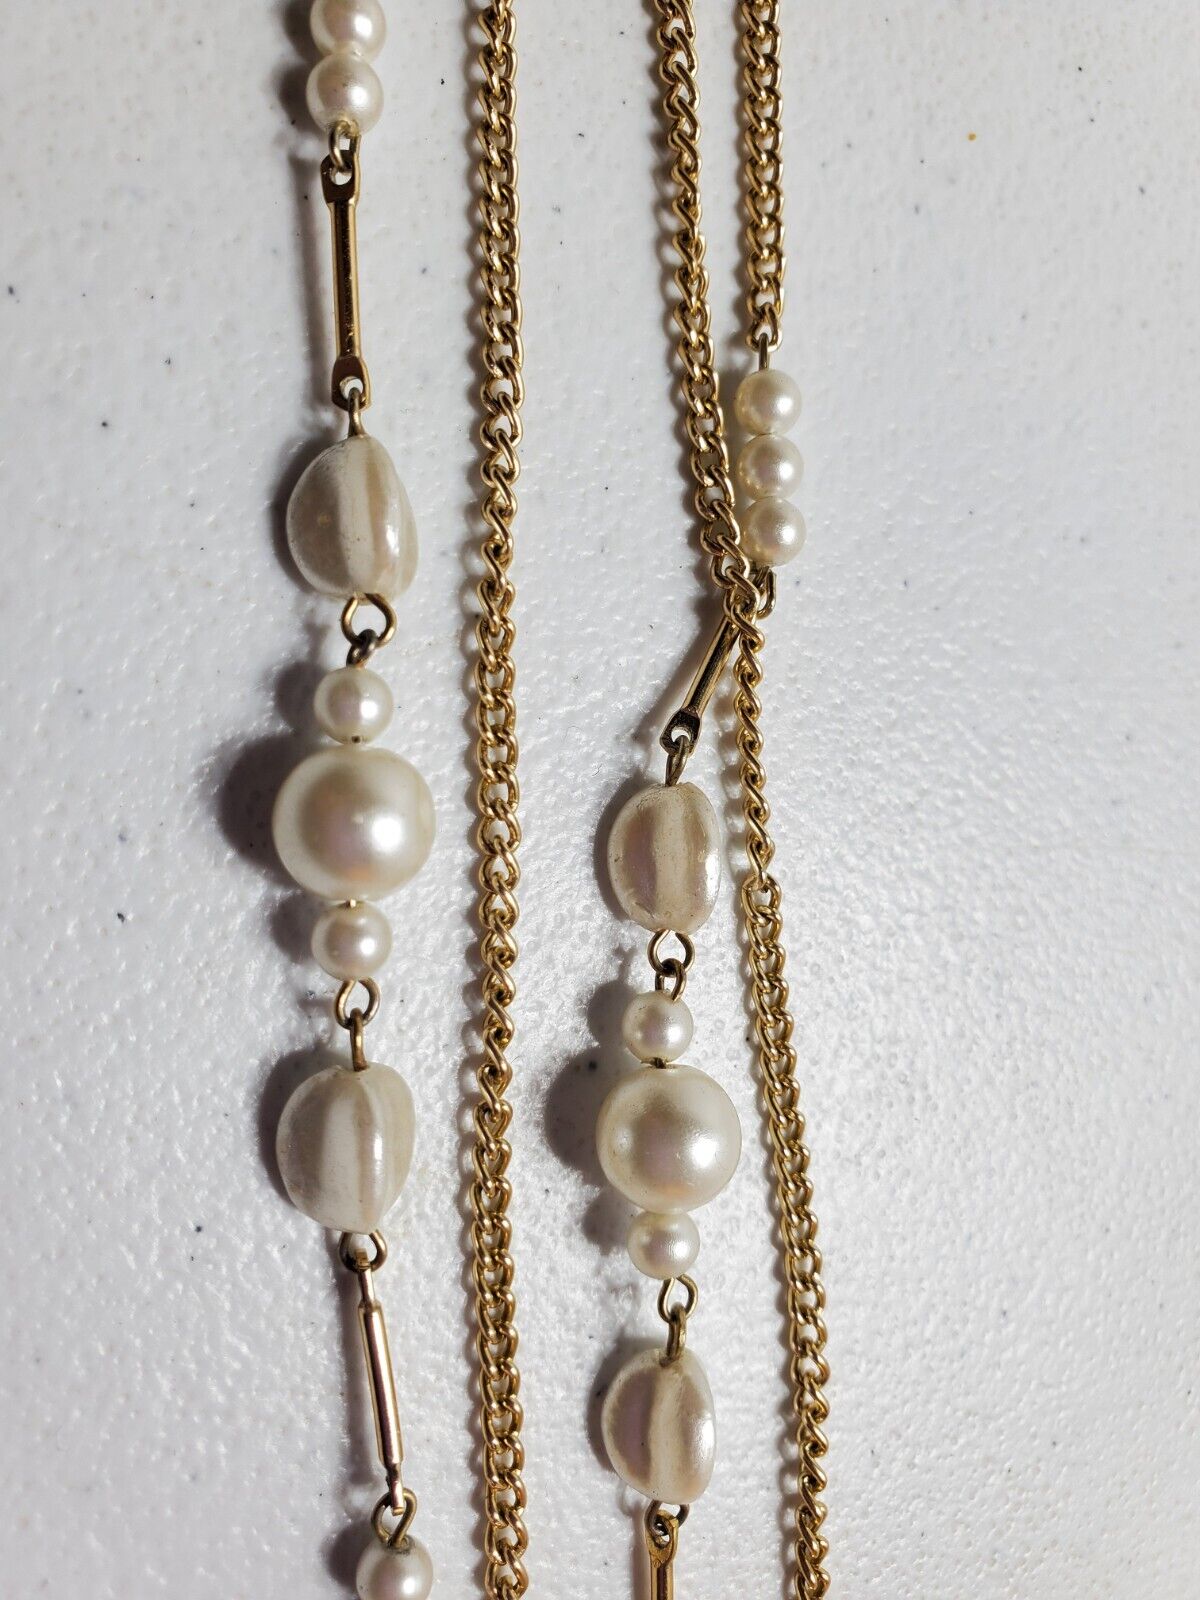 Vintage Gold Tone Necklace, White Long Pearl Chain - image 4